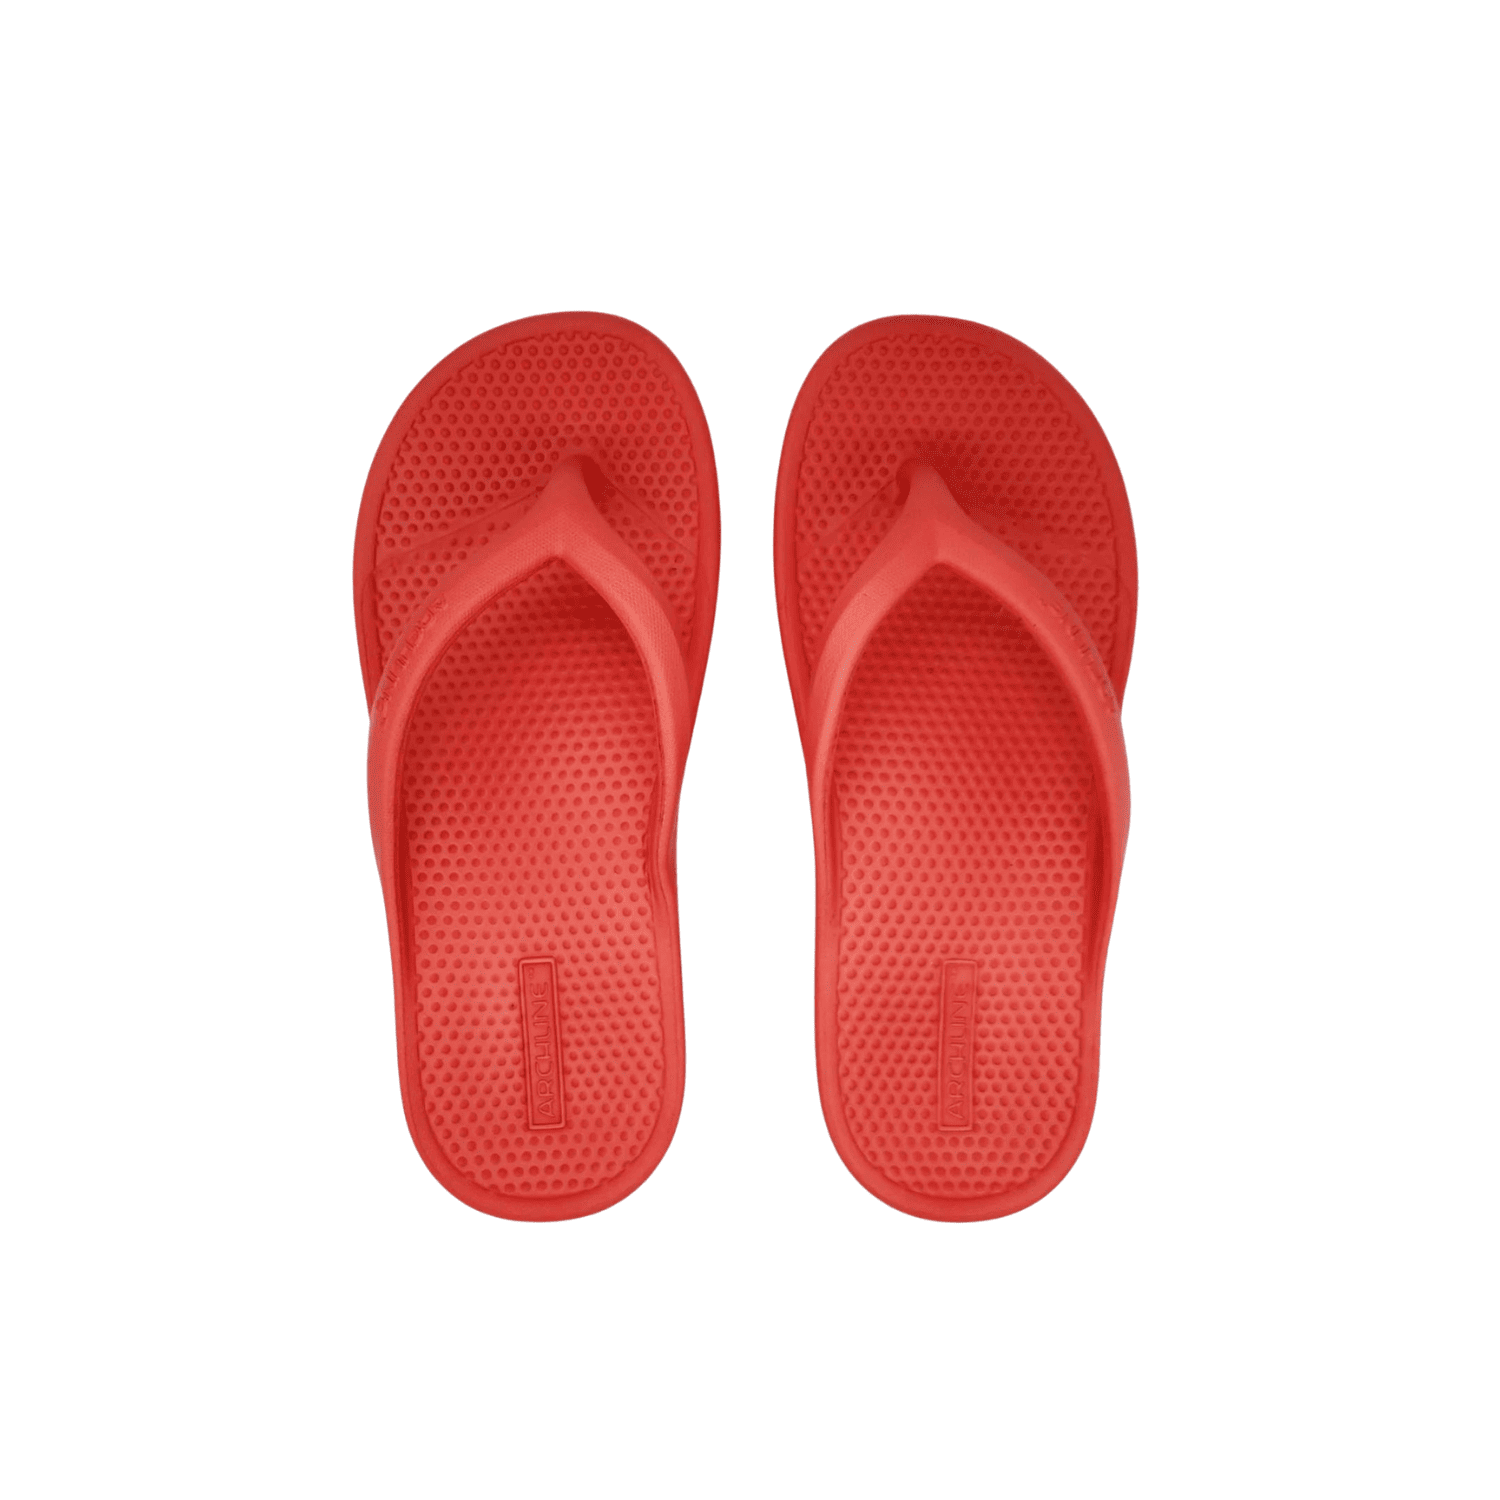 Archline Rebound Orthotic Thongs - Red_